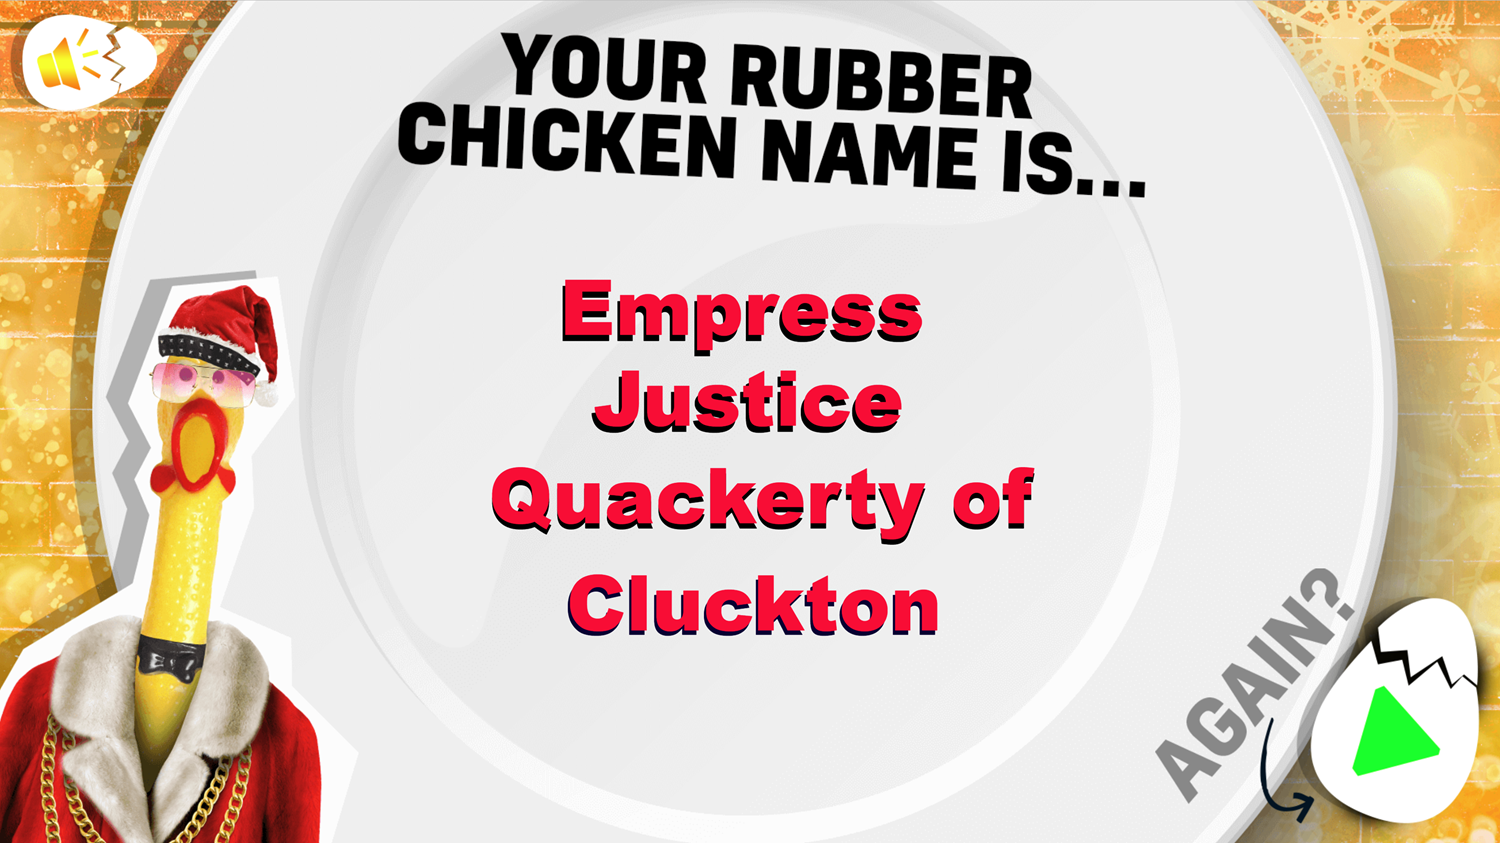 What's Your Chicken Name Game Results Screen Screenshot.